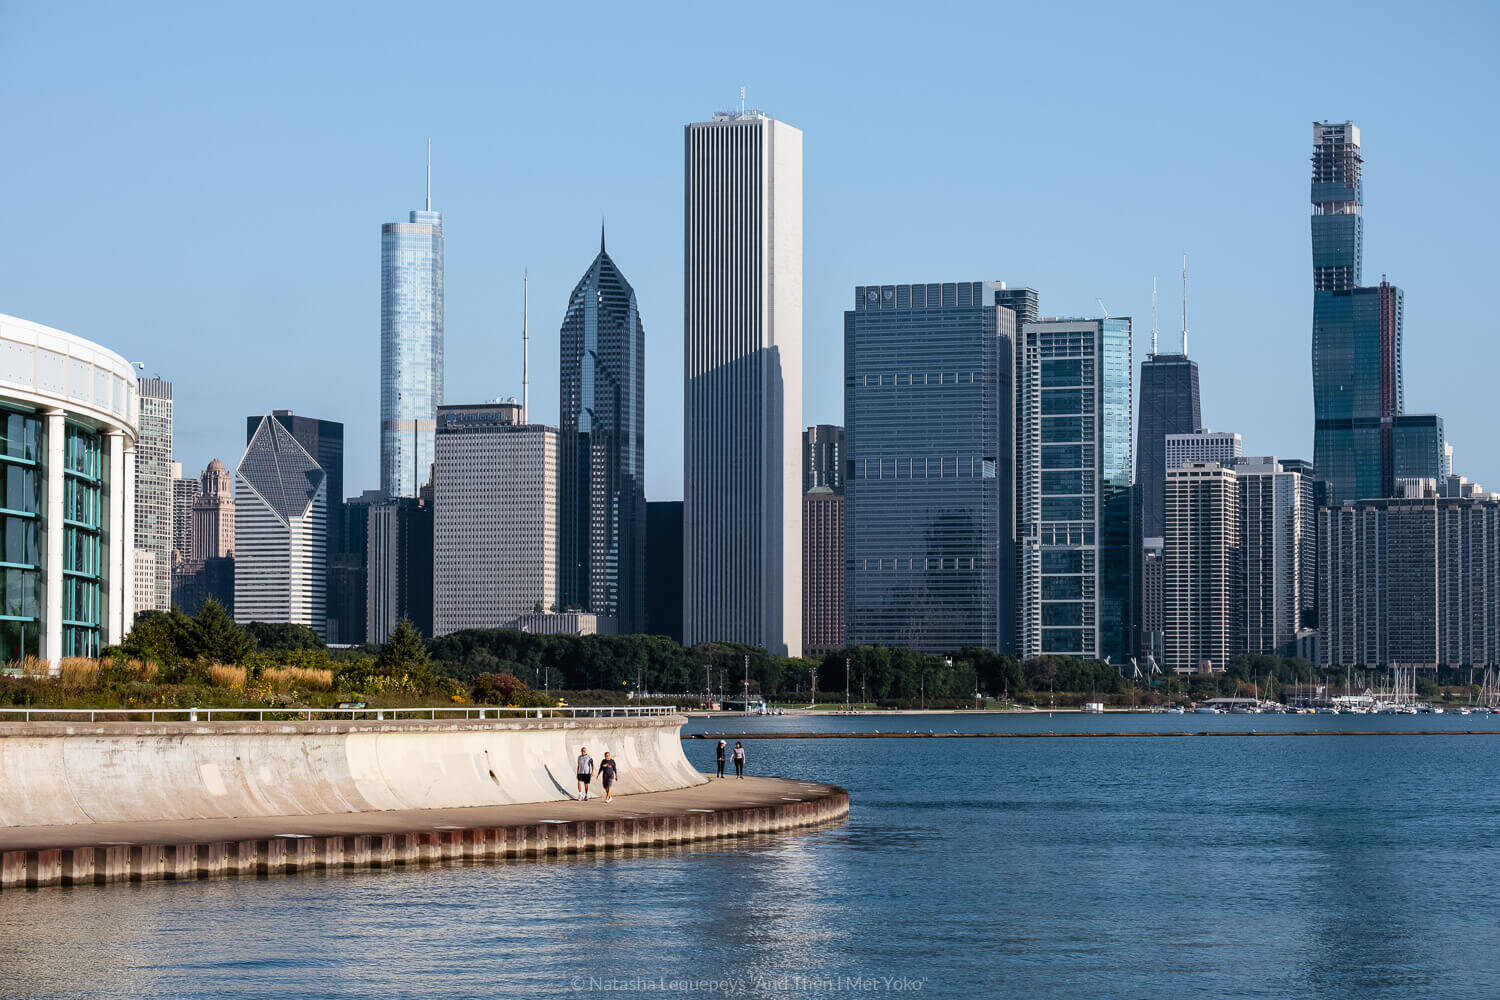 The Chicago skyline from the Lakefront trail in Chicago, USA. Travel photography and guide by © Natasha Lequepeys for "And Then I Met Yoko". #chicago #usa #travelblog #travelphotography